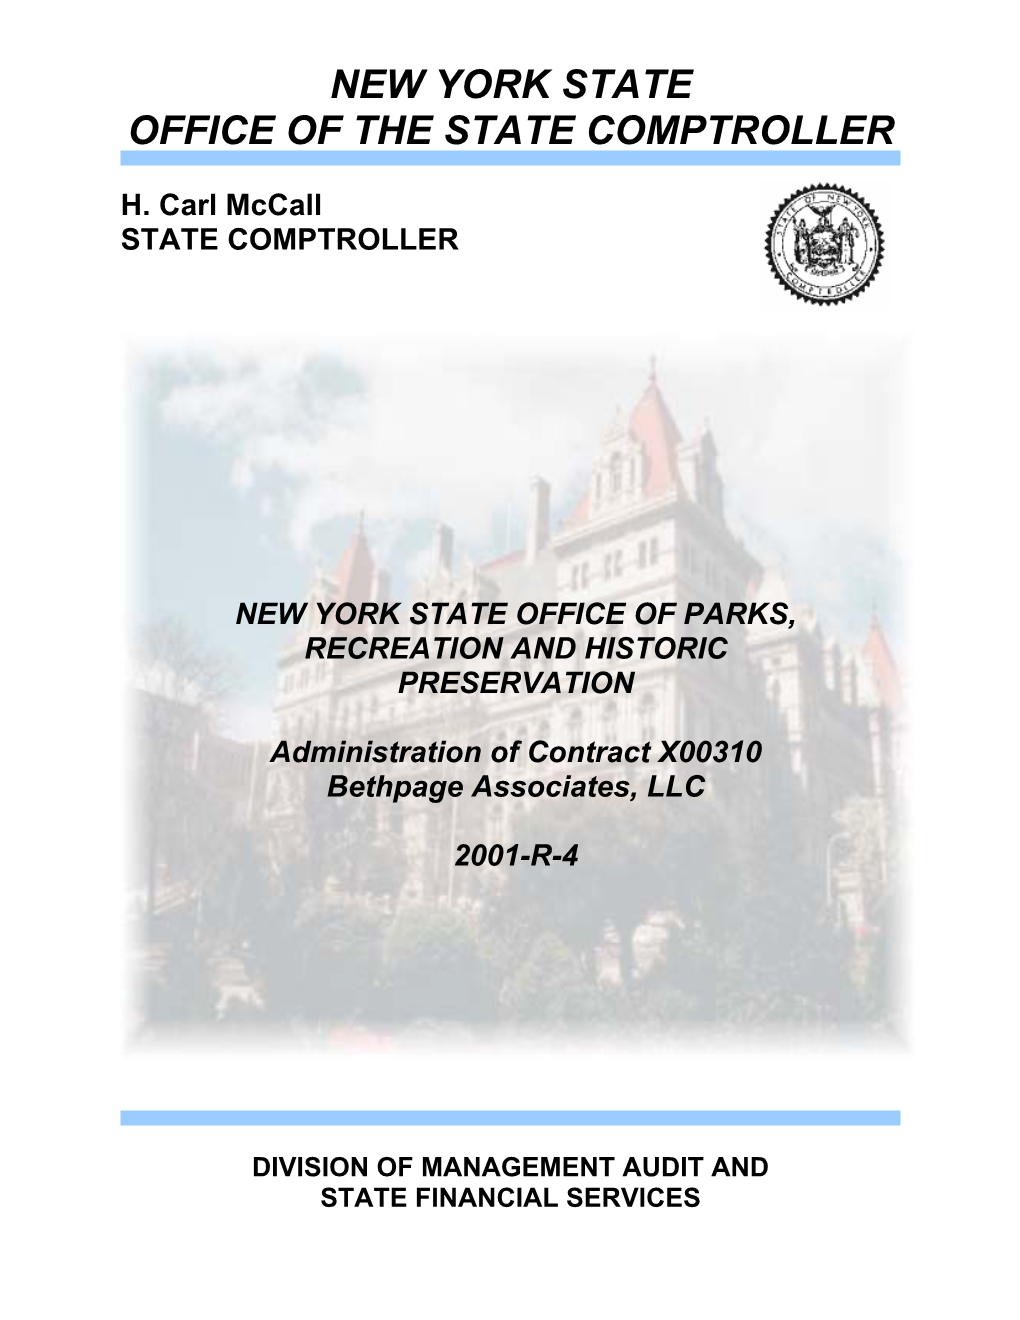 Administration of Contract X00310 Bethpage Associates, LLC